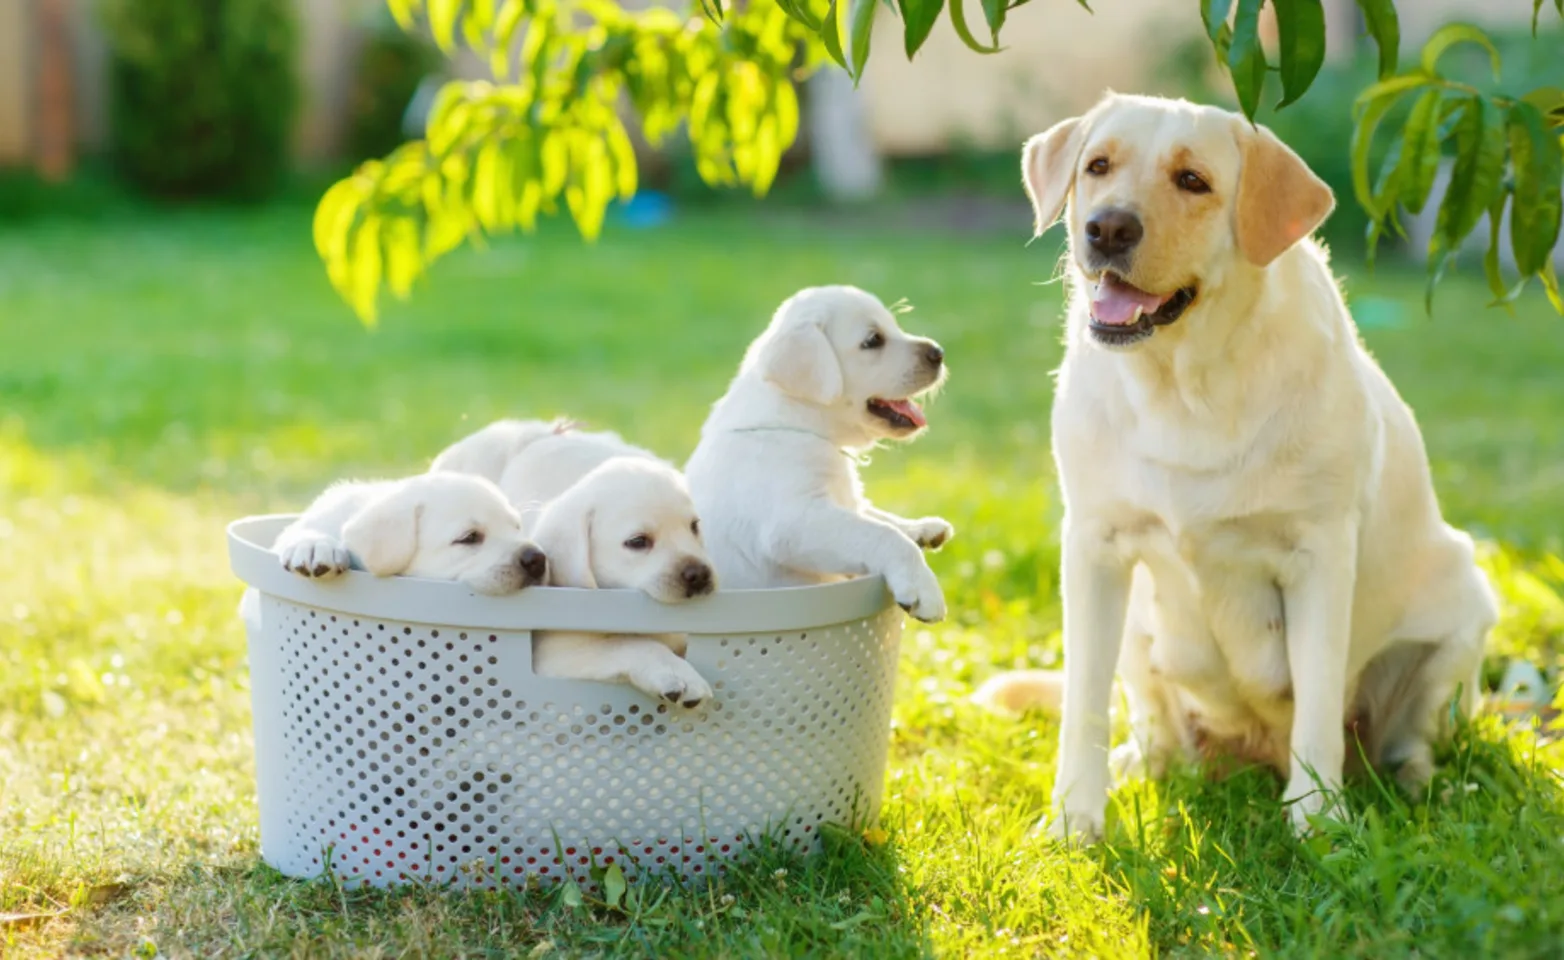 Puppies in a Basket with Dog Outside